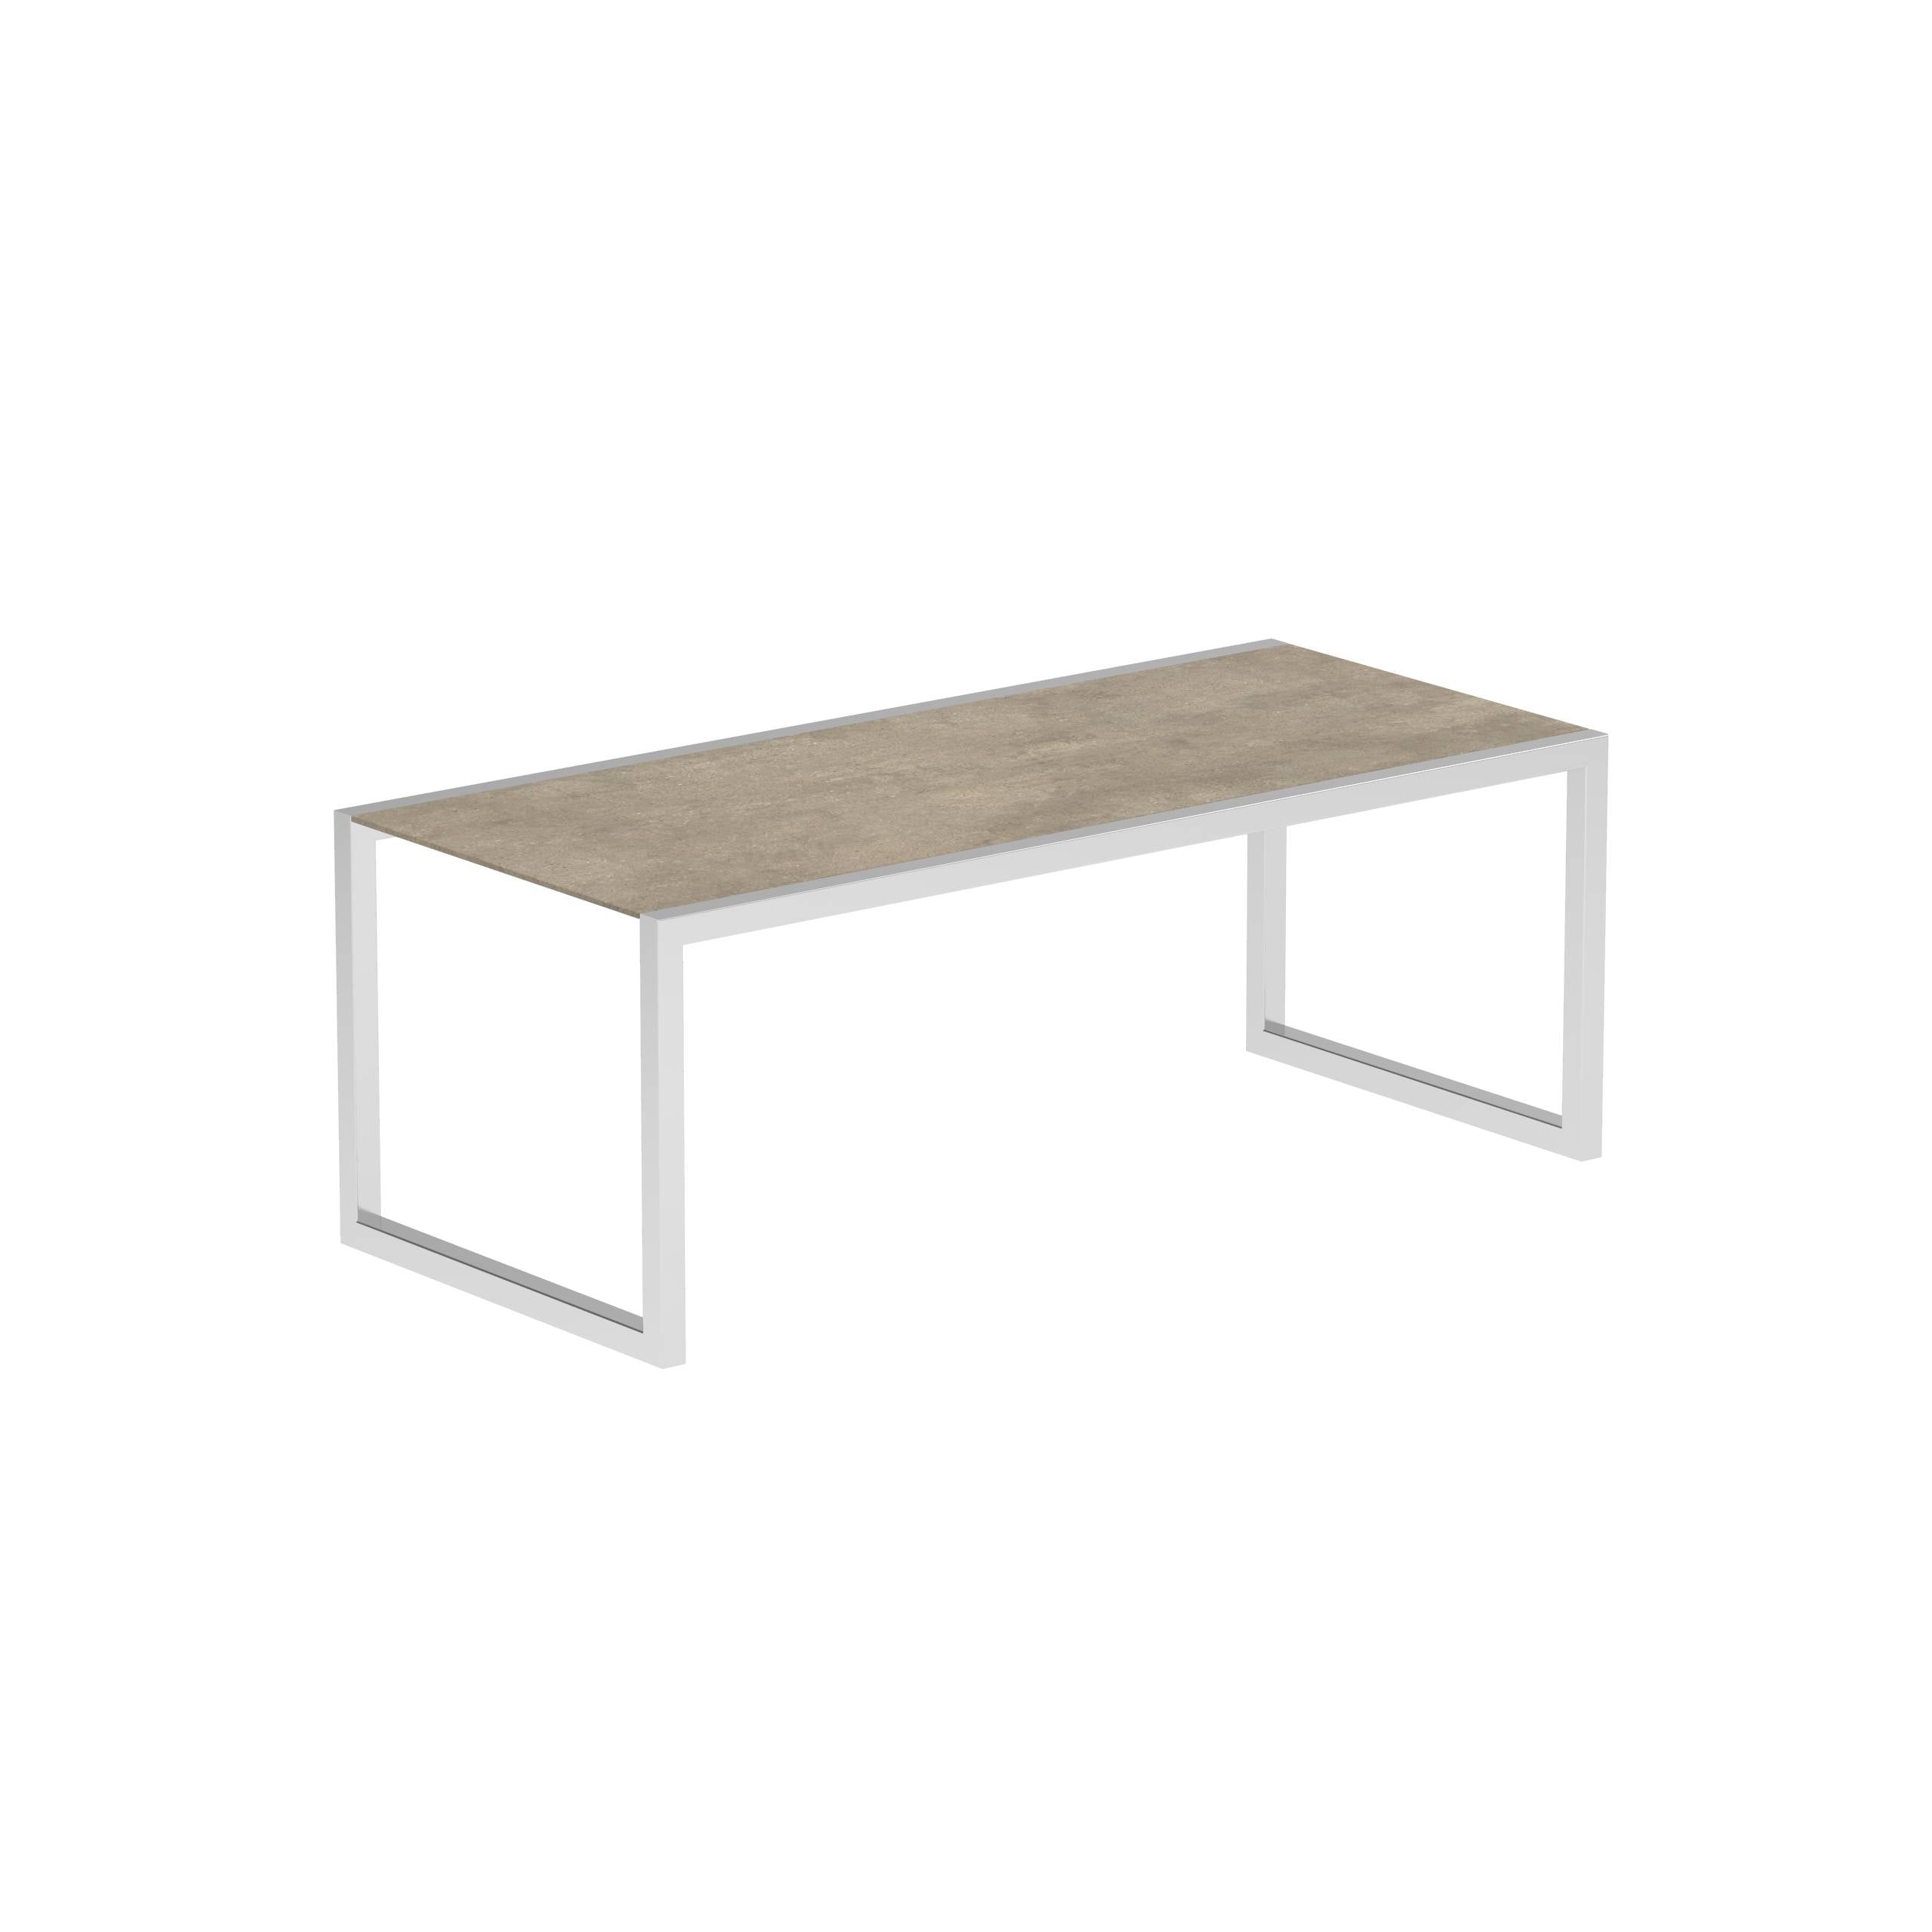 Ninix Table 200x90cm With Stainless Steel El.Pol And Ceramic Terra Sabbia